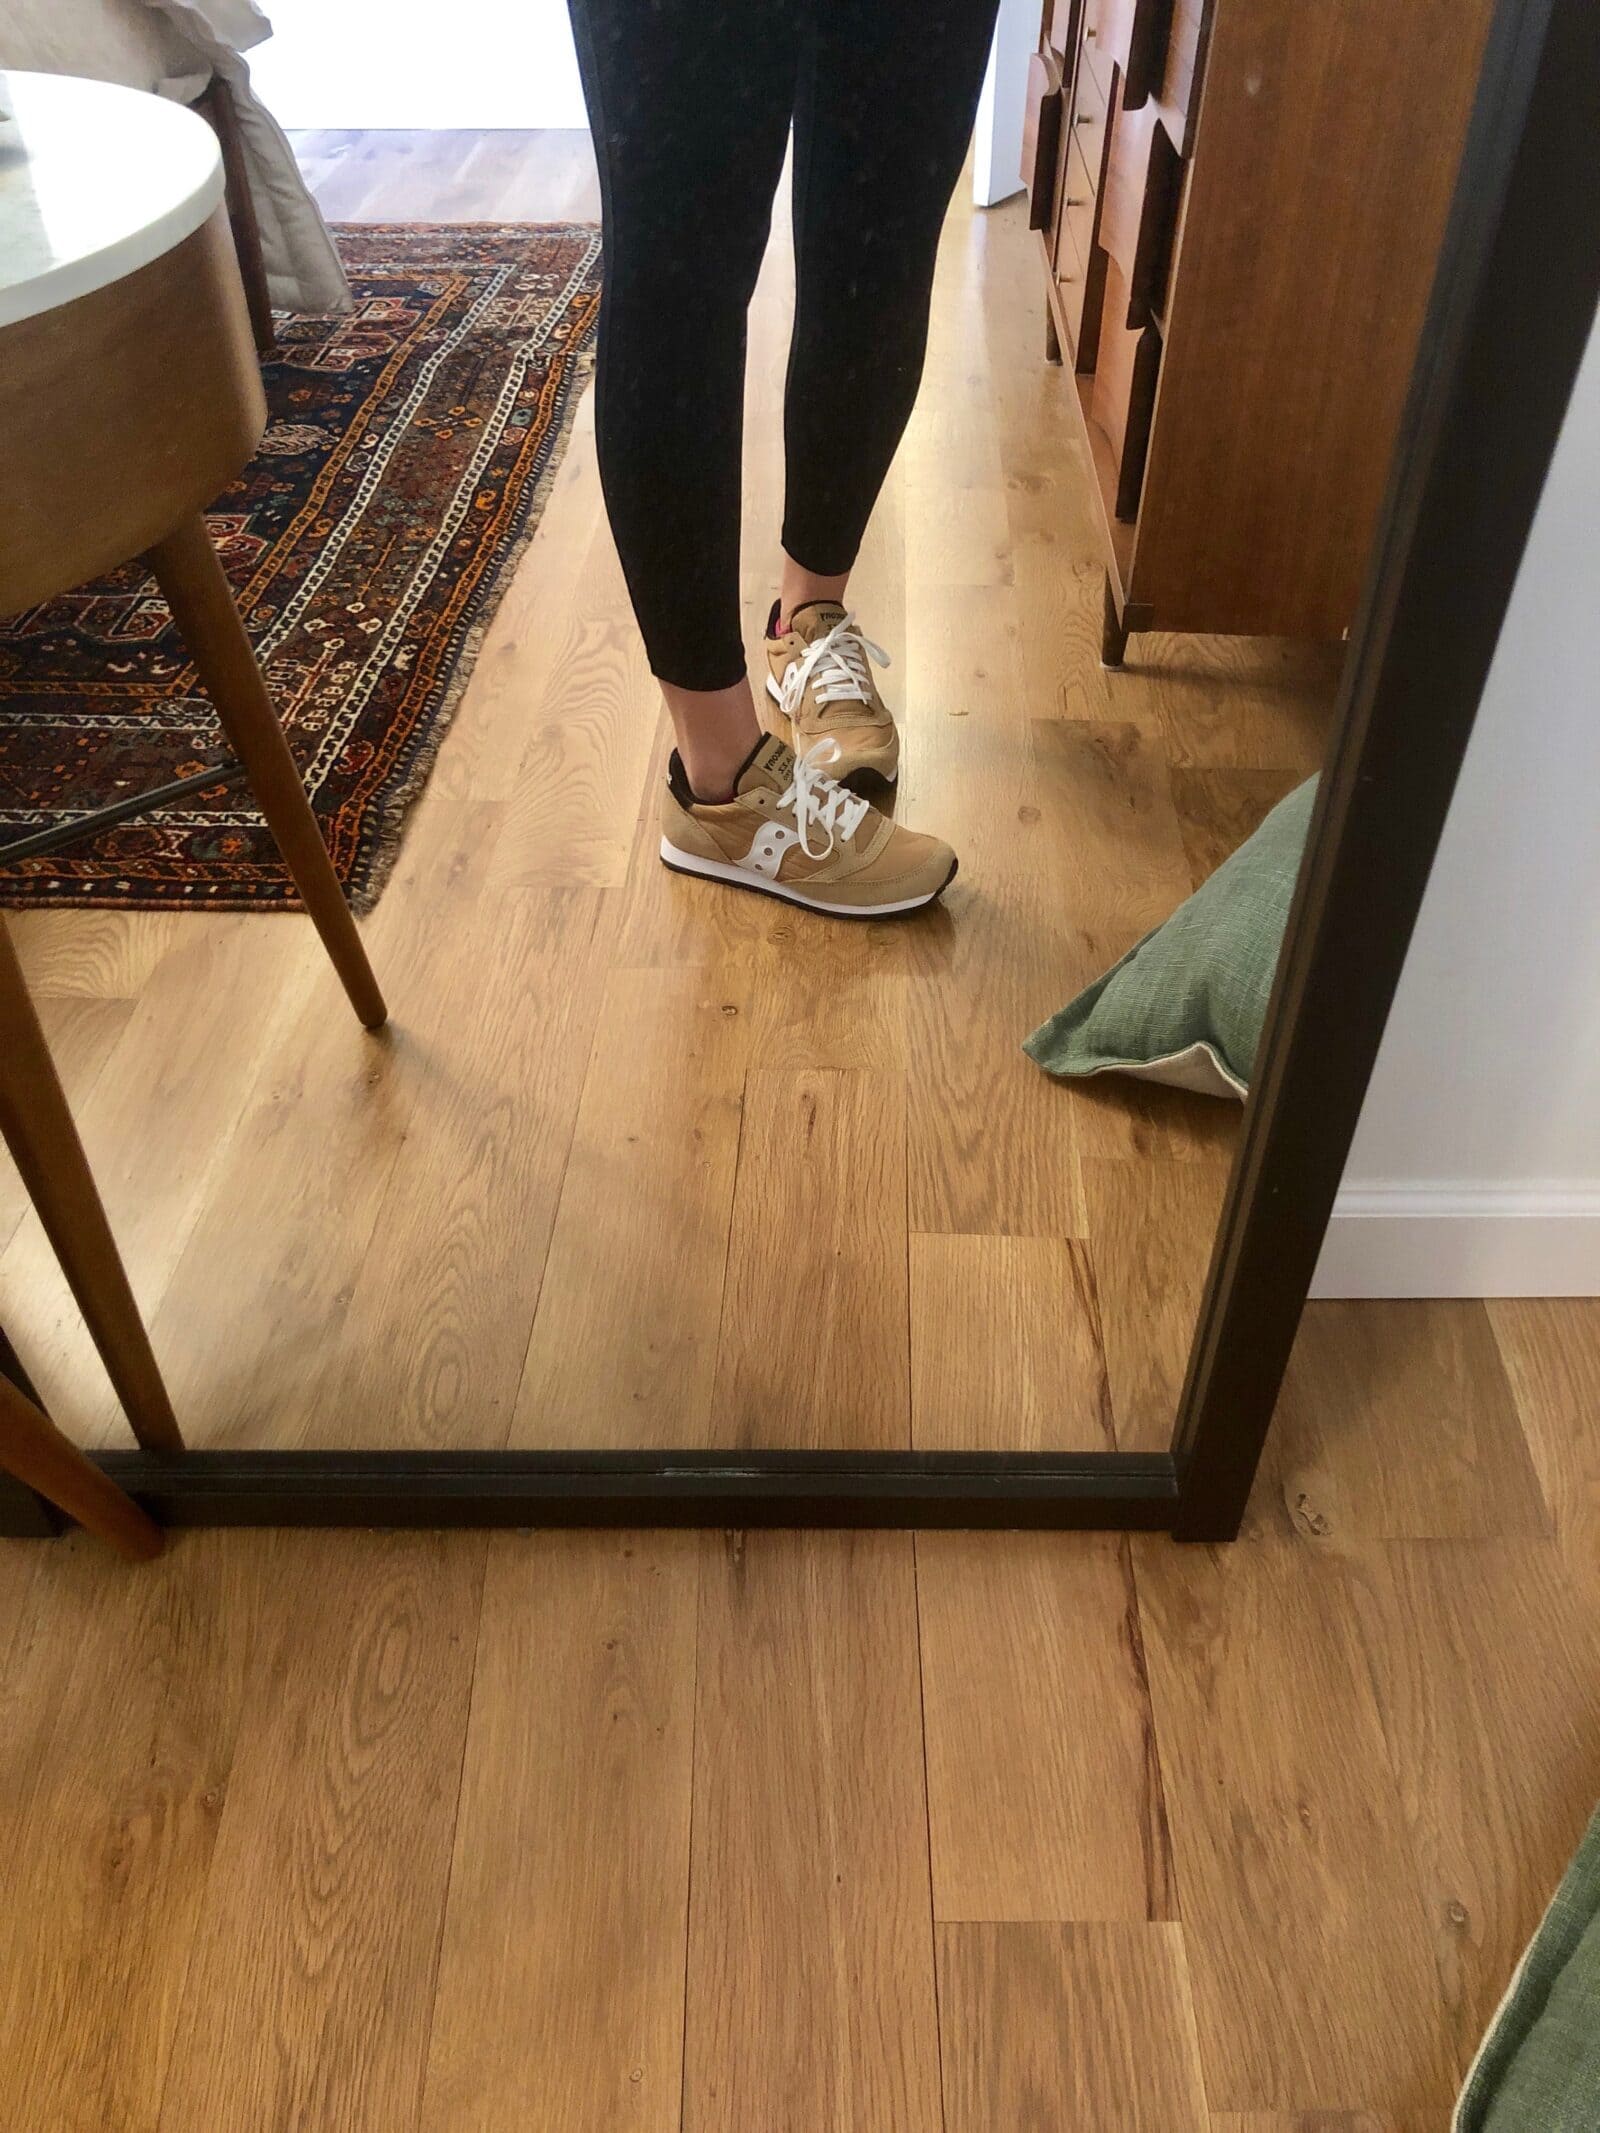 tennis shoes in mirror